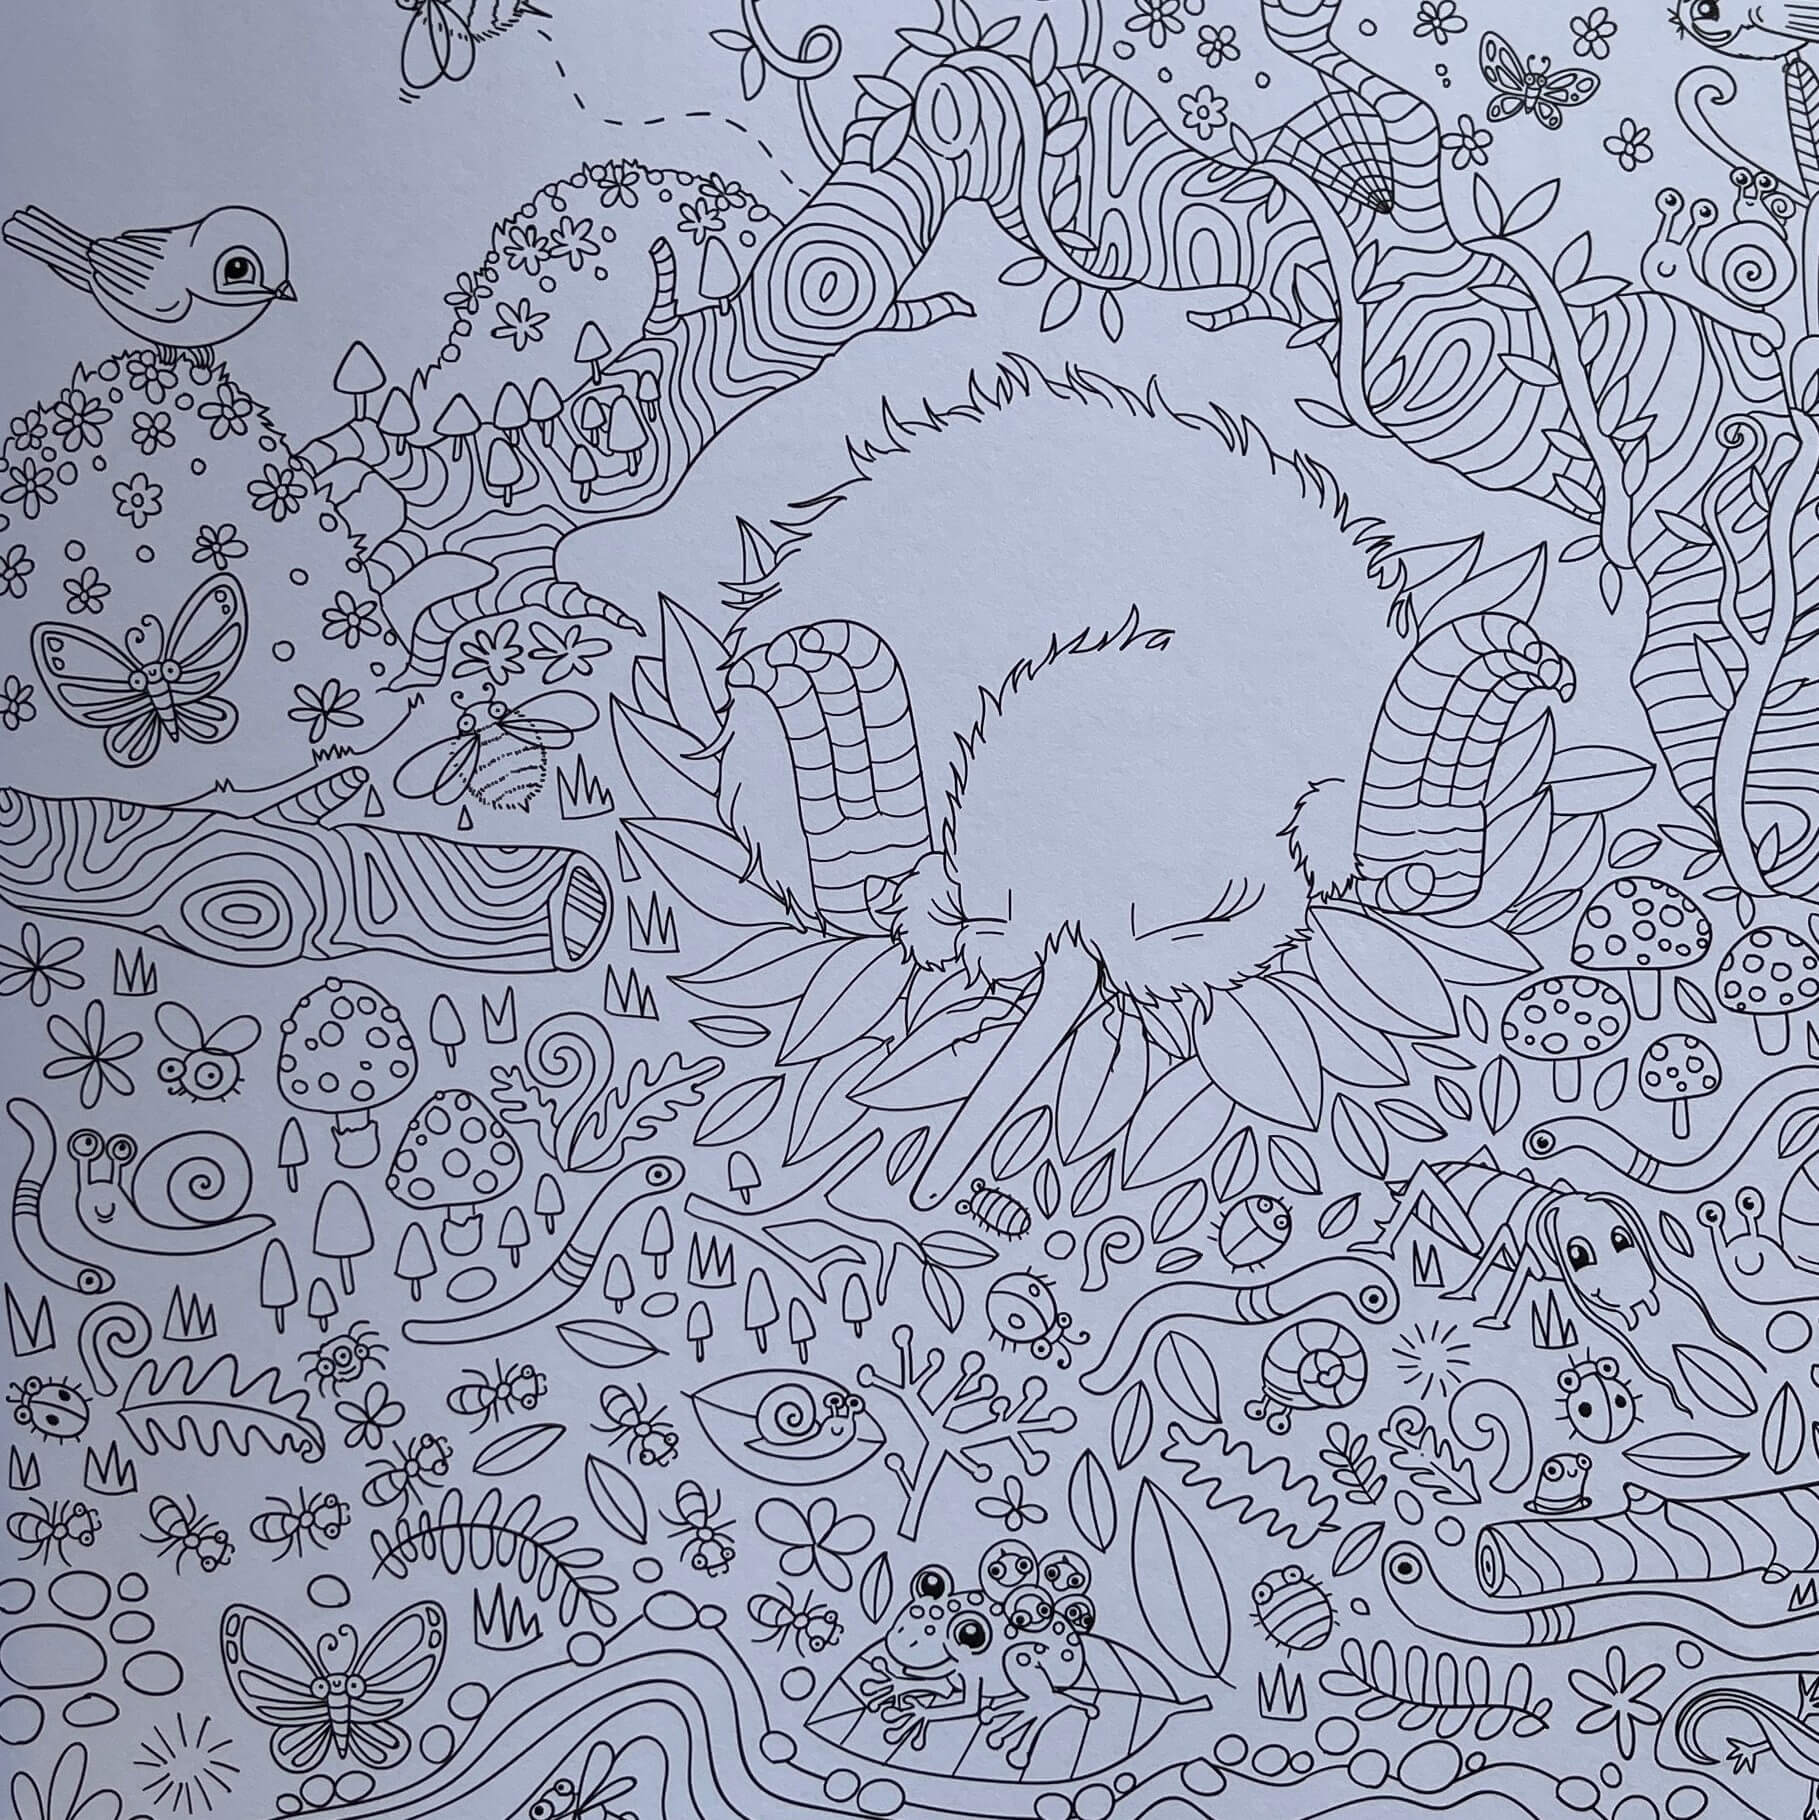 Page from Kuwis Creative colouring book by Kat Merewether.